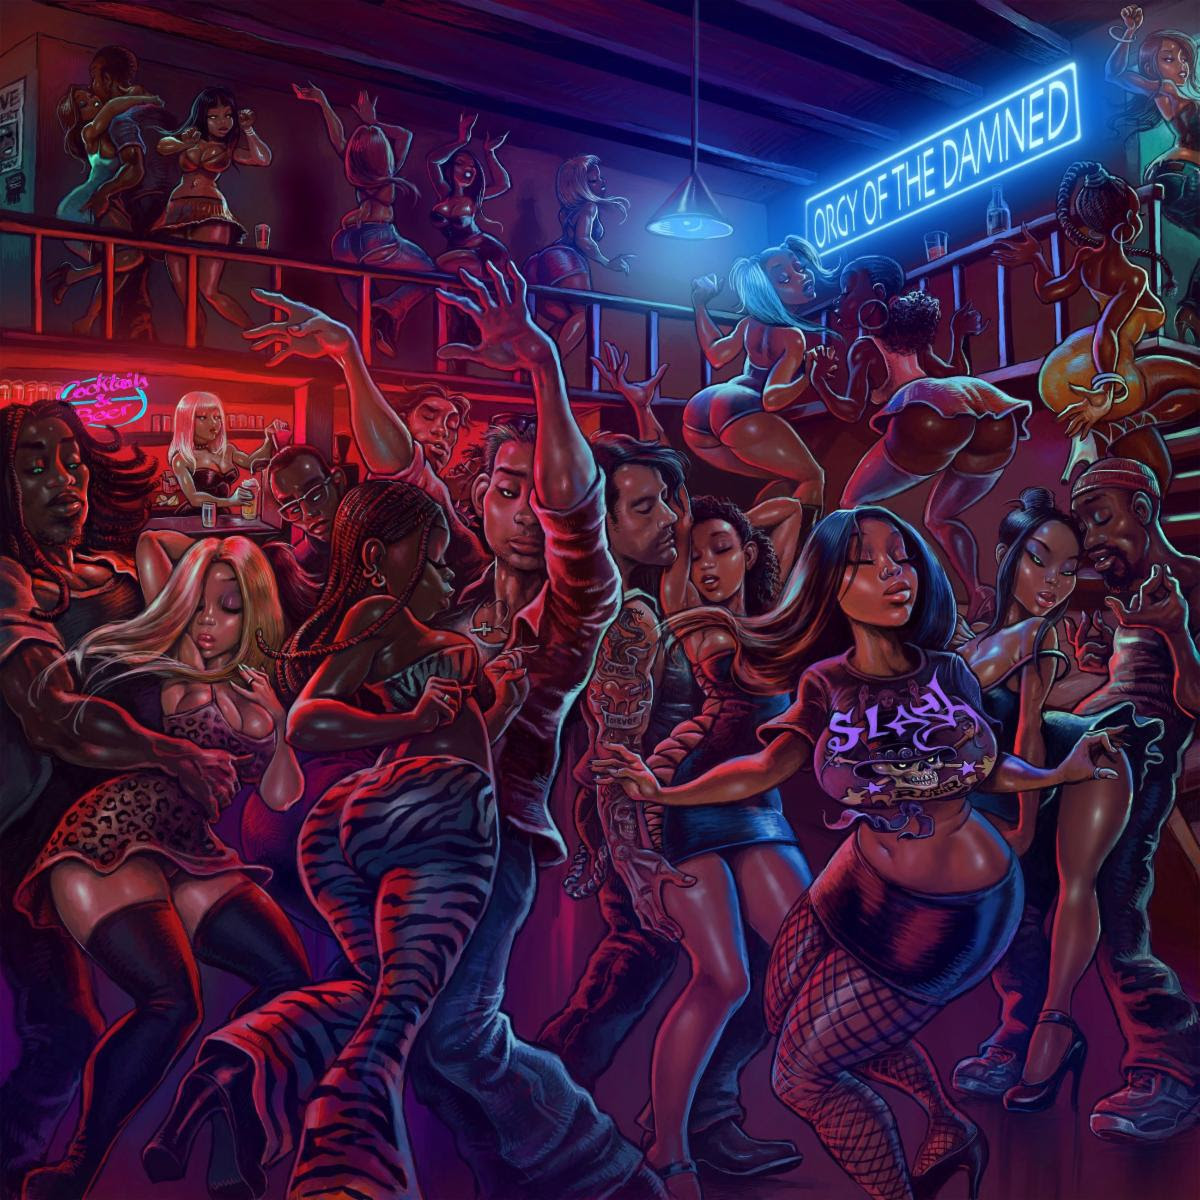 Above: SLASH new album Orgy of the Damned, cover artwork by Toni Greis.